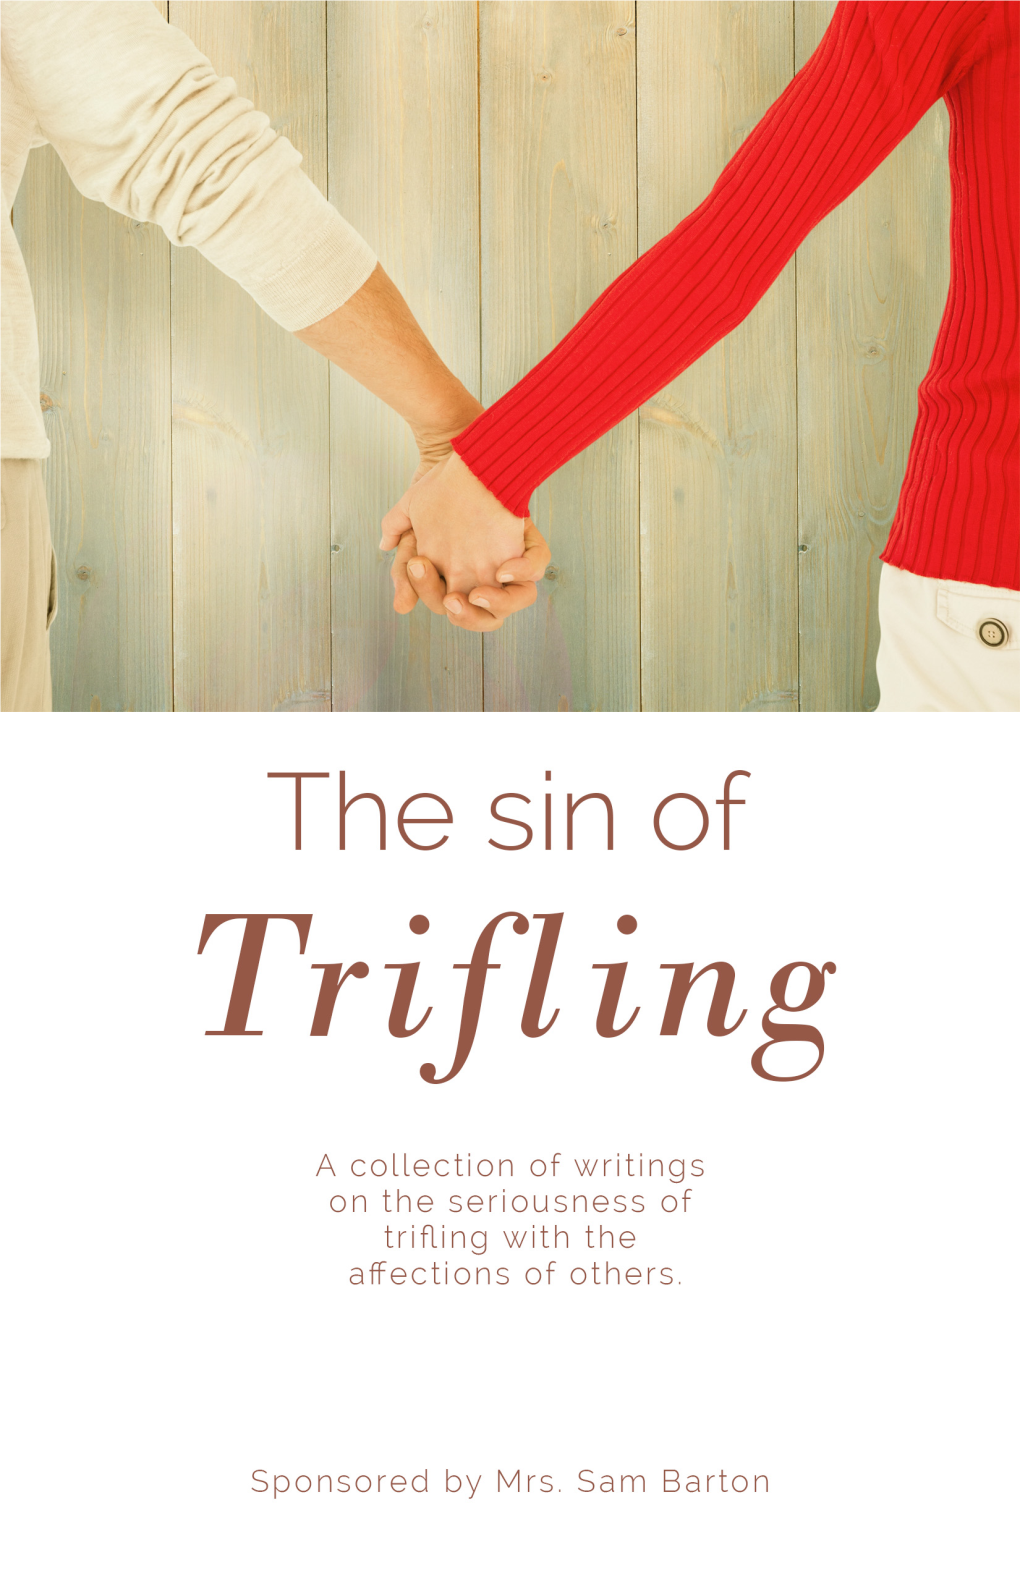 The Sin of Trifling with Another’S Affections by Mrs